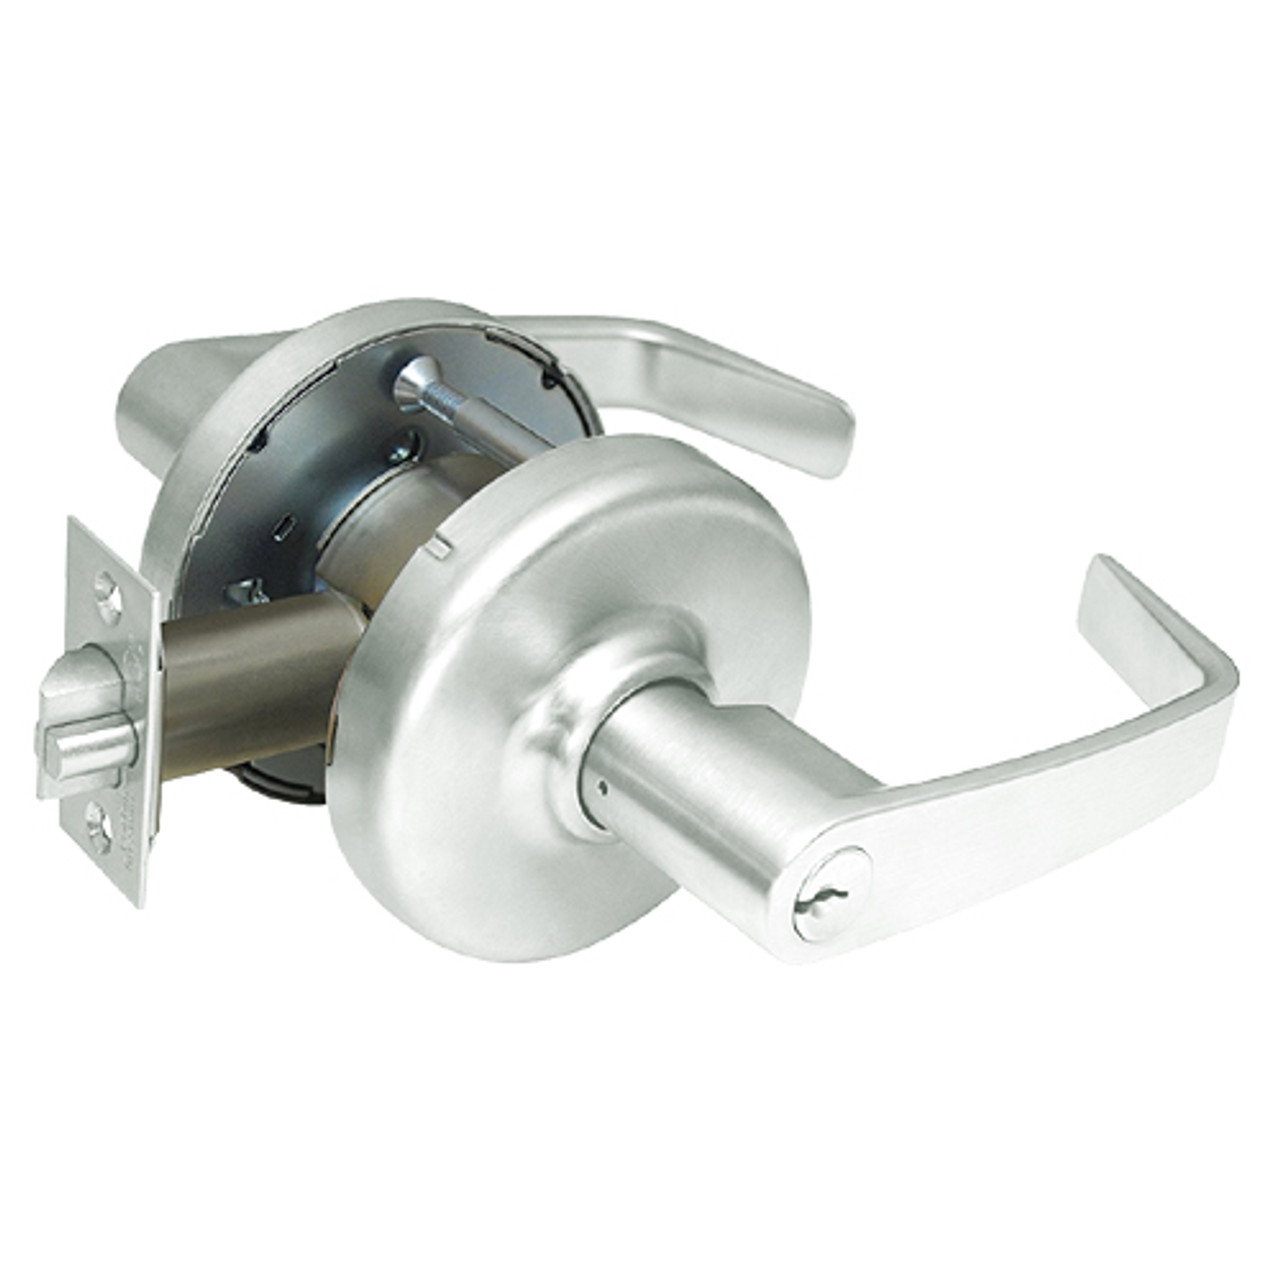 CL3361-NZD-618 Corbin CL3300 Series Extra Heavy Duty Entry or Office Cylindrical Locksets with Newport Lever in Bright Nickel Plated Finish